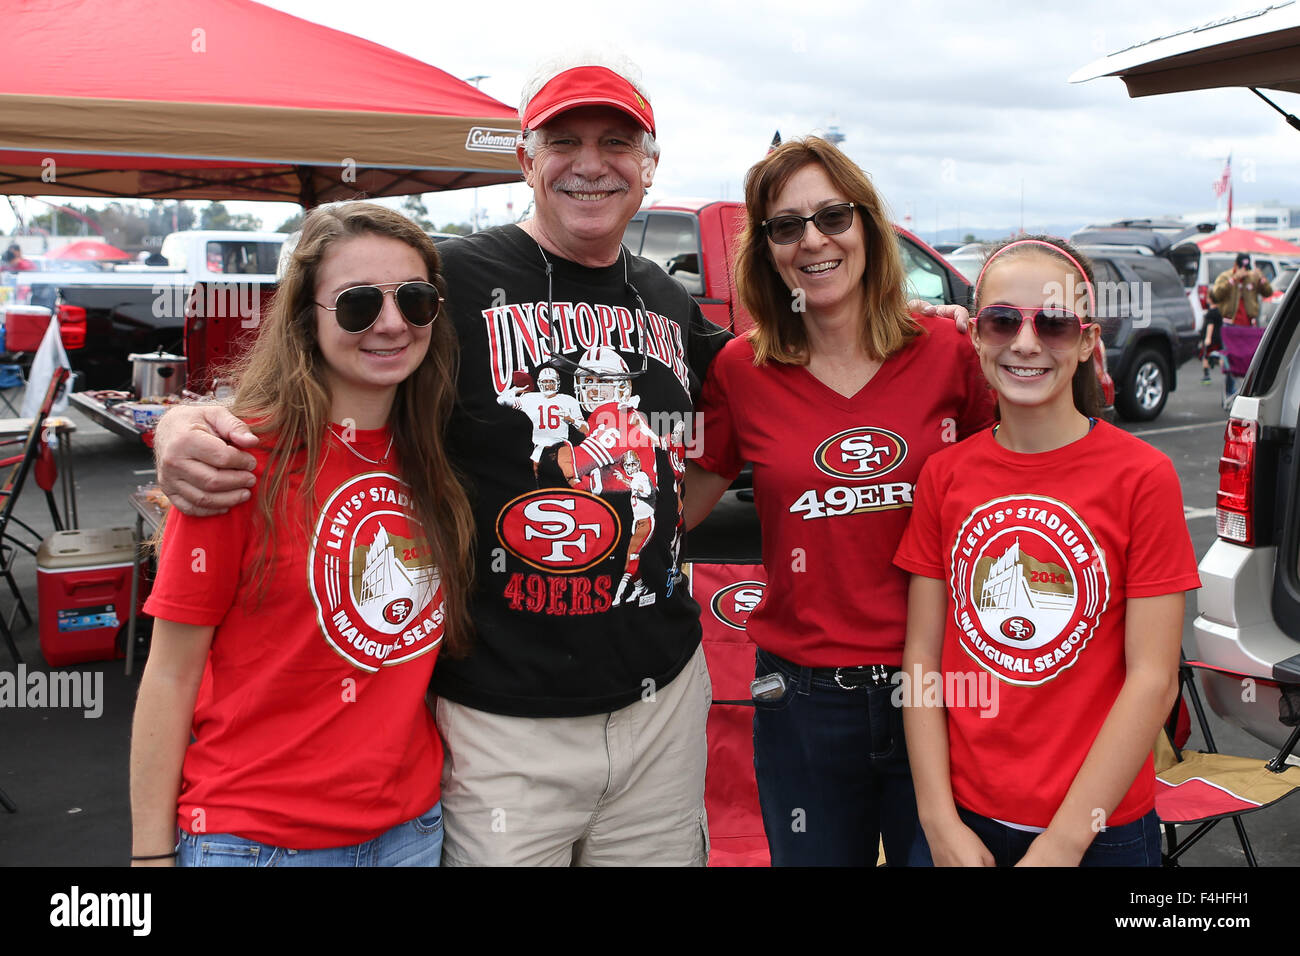 October 18, 2015: 49ers fans tailgating in the parking lot of Levi's Stadium  prior to the start of the NFL football game between the Baltimore Ravens  and the San Francisco 49ers at